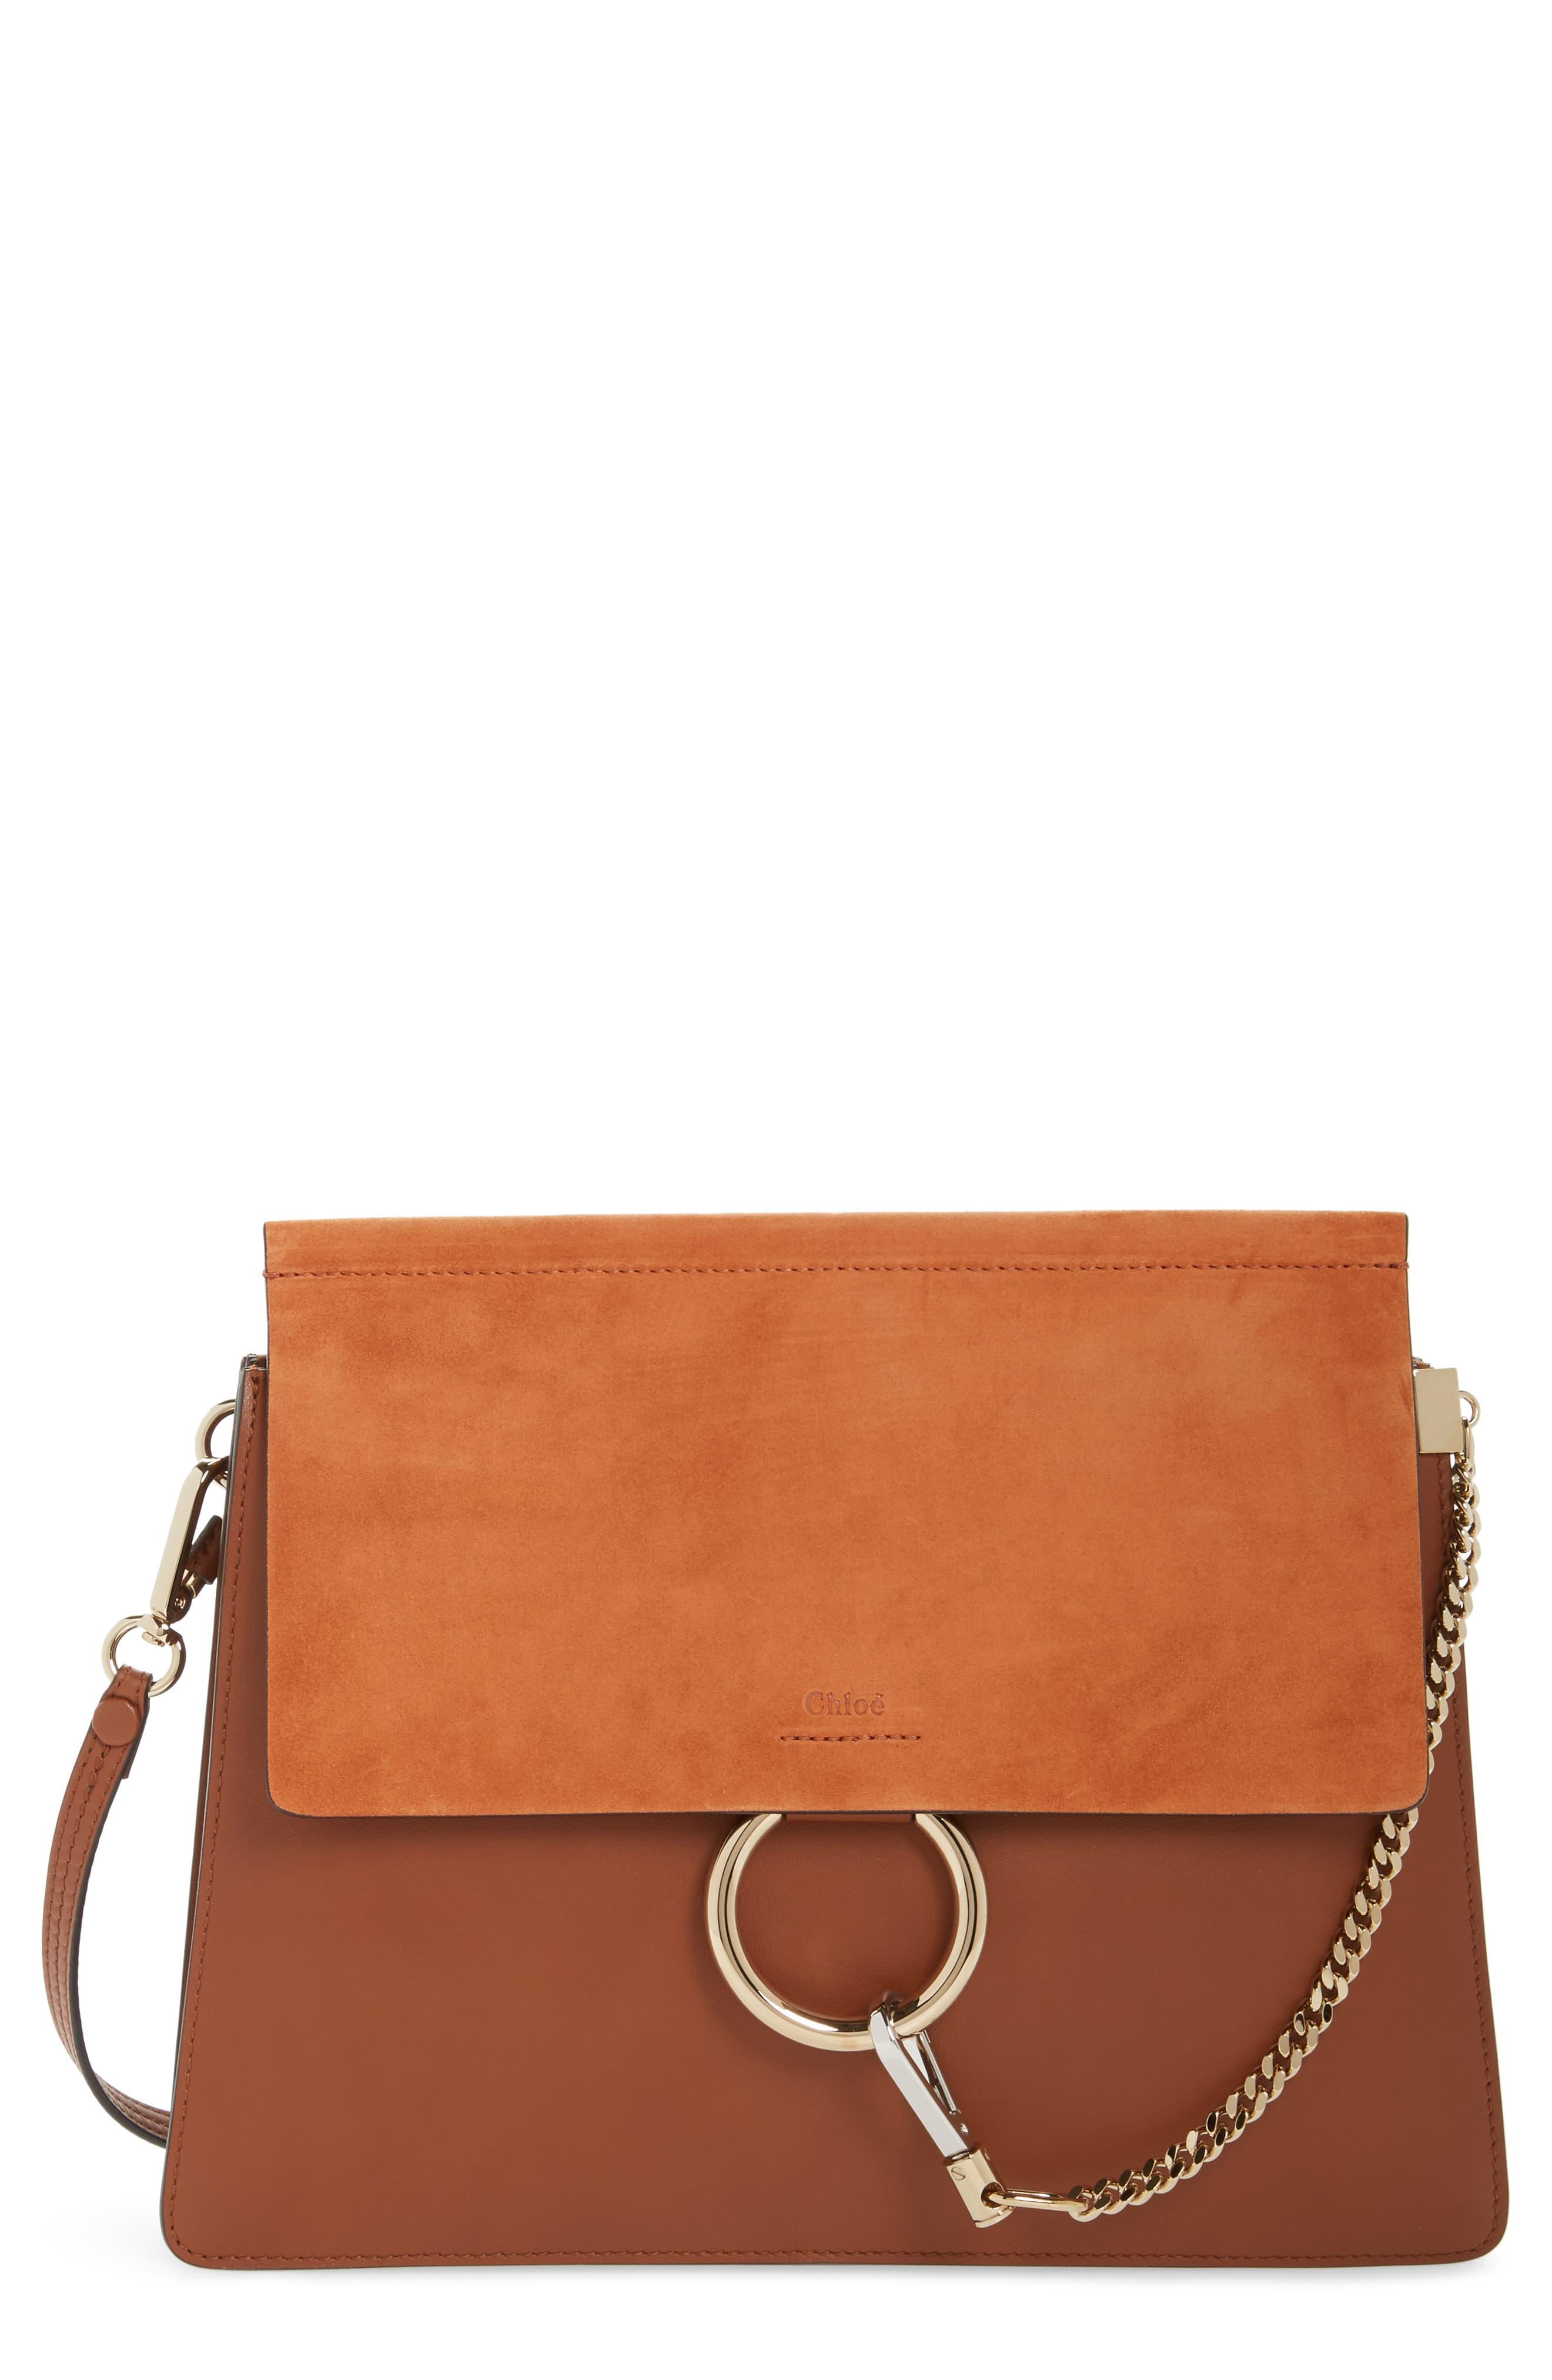 Chloé Faye Medium Leather And Suede Shoulder Bag - Lyst